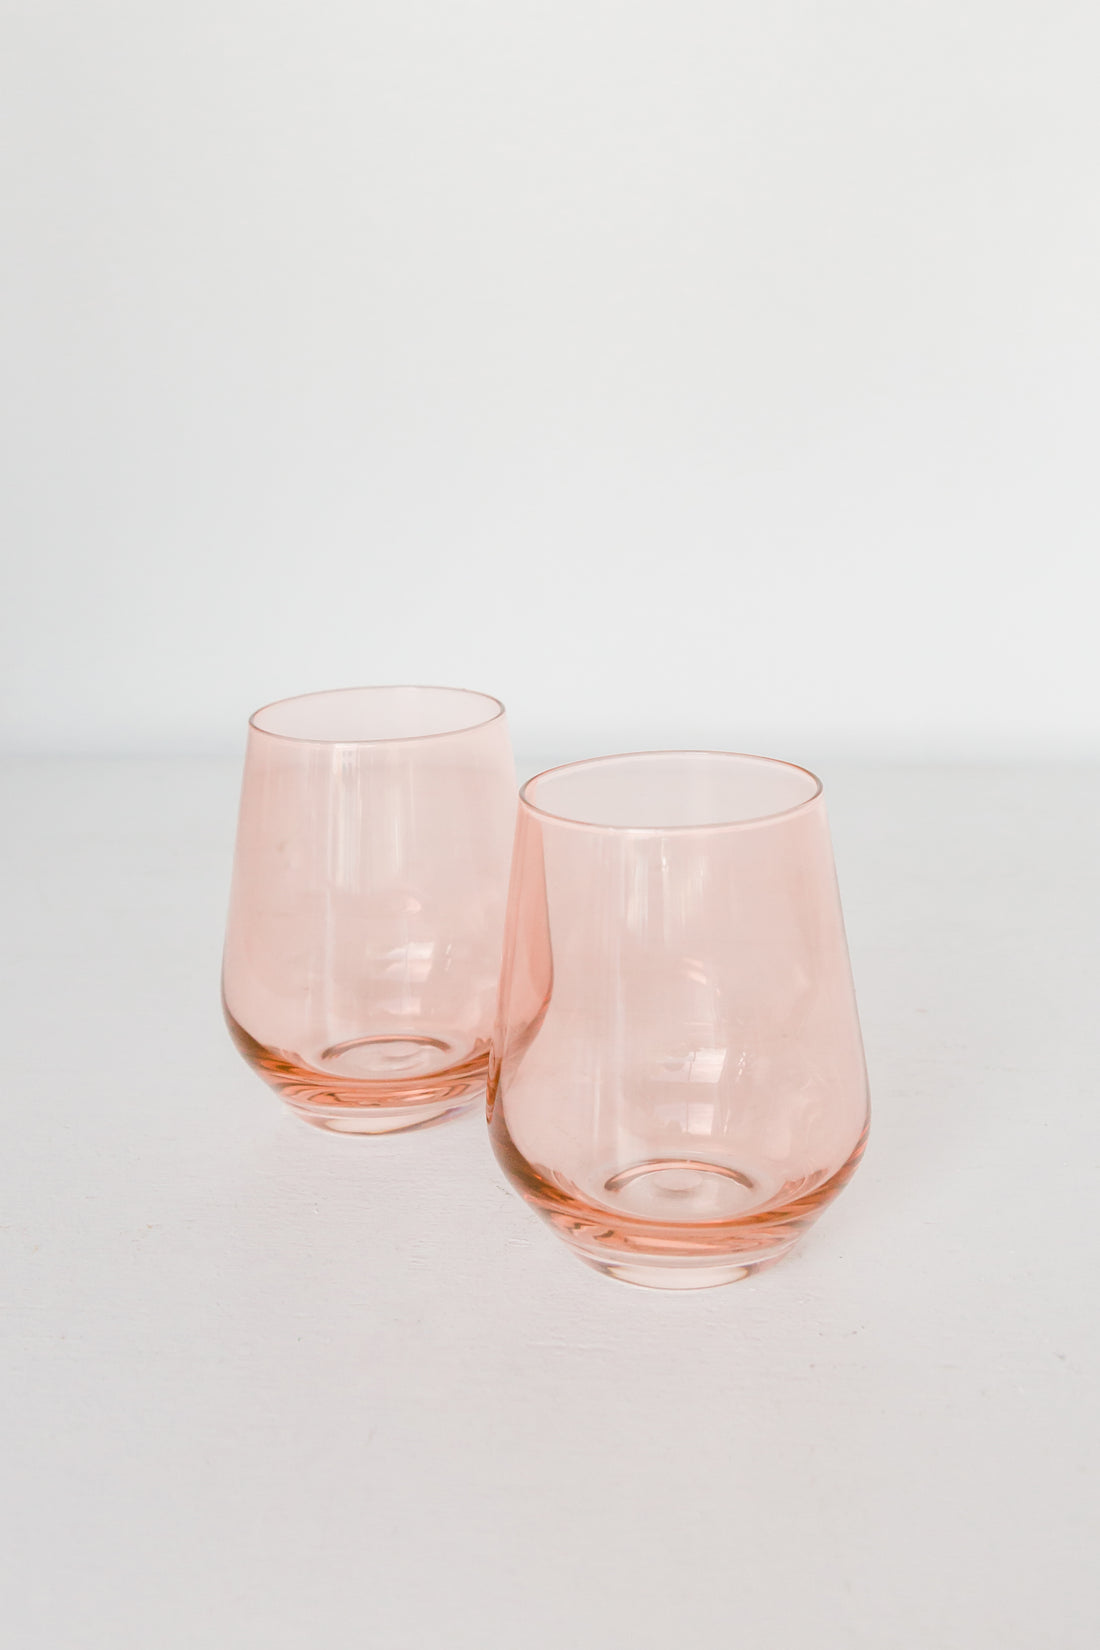 Coral Sea Collection Colored Stemless Wine Glasses - Set of 2